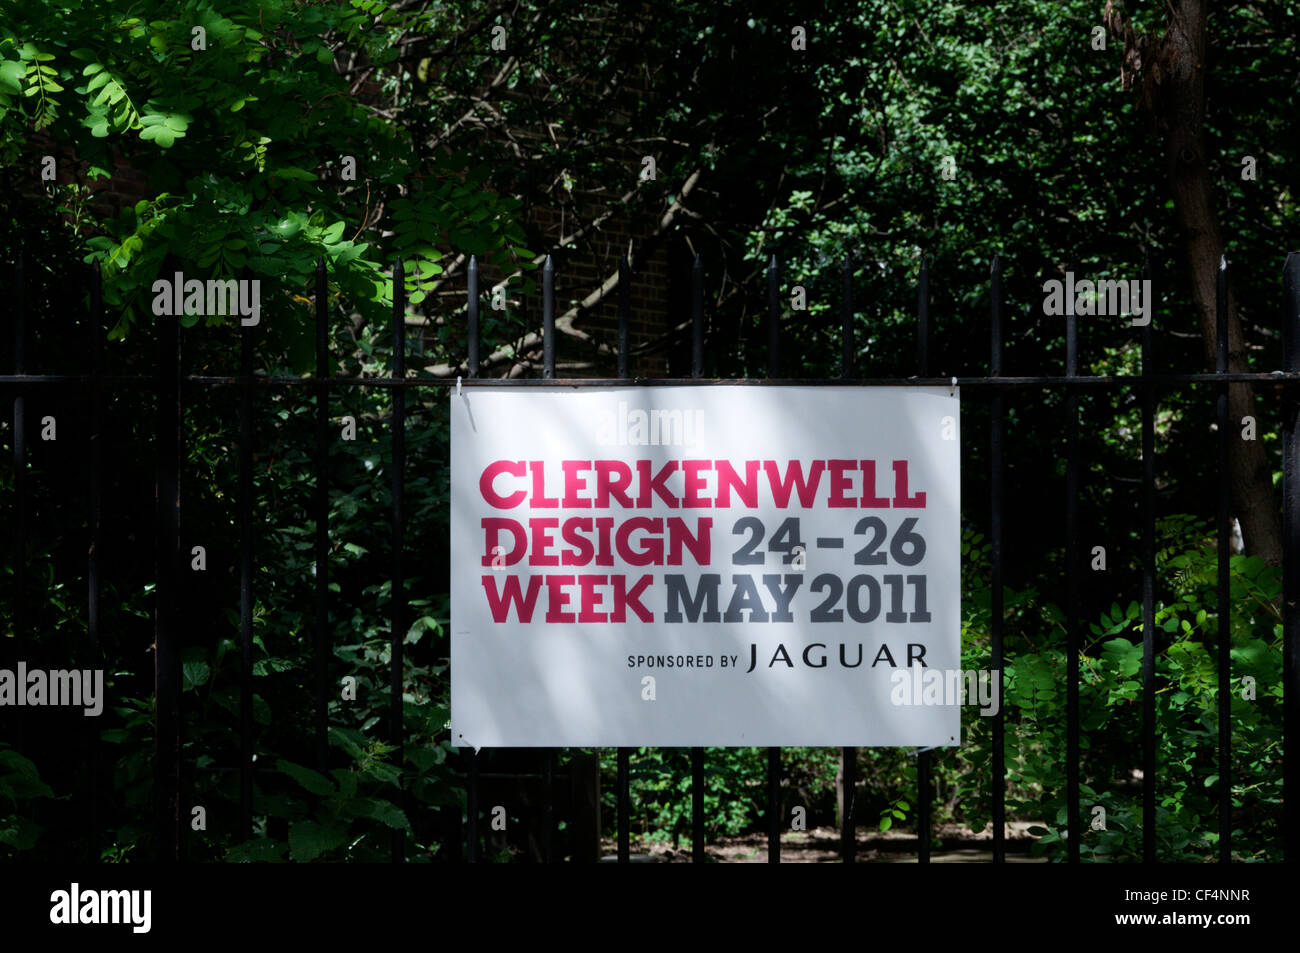 A sign on railings for Clerkenwell Design Week. Stock Photo